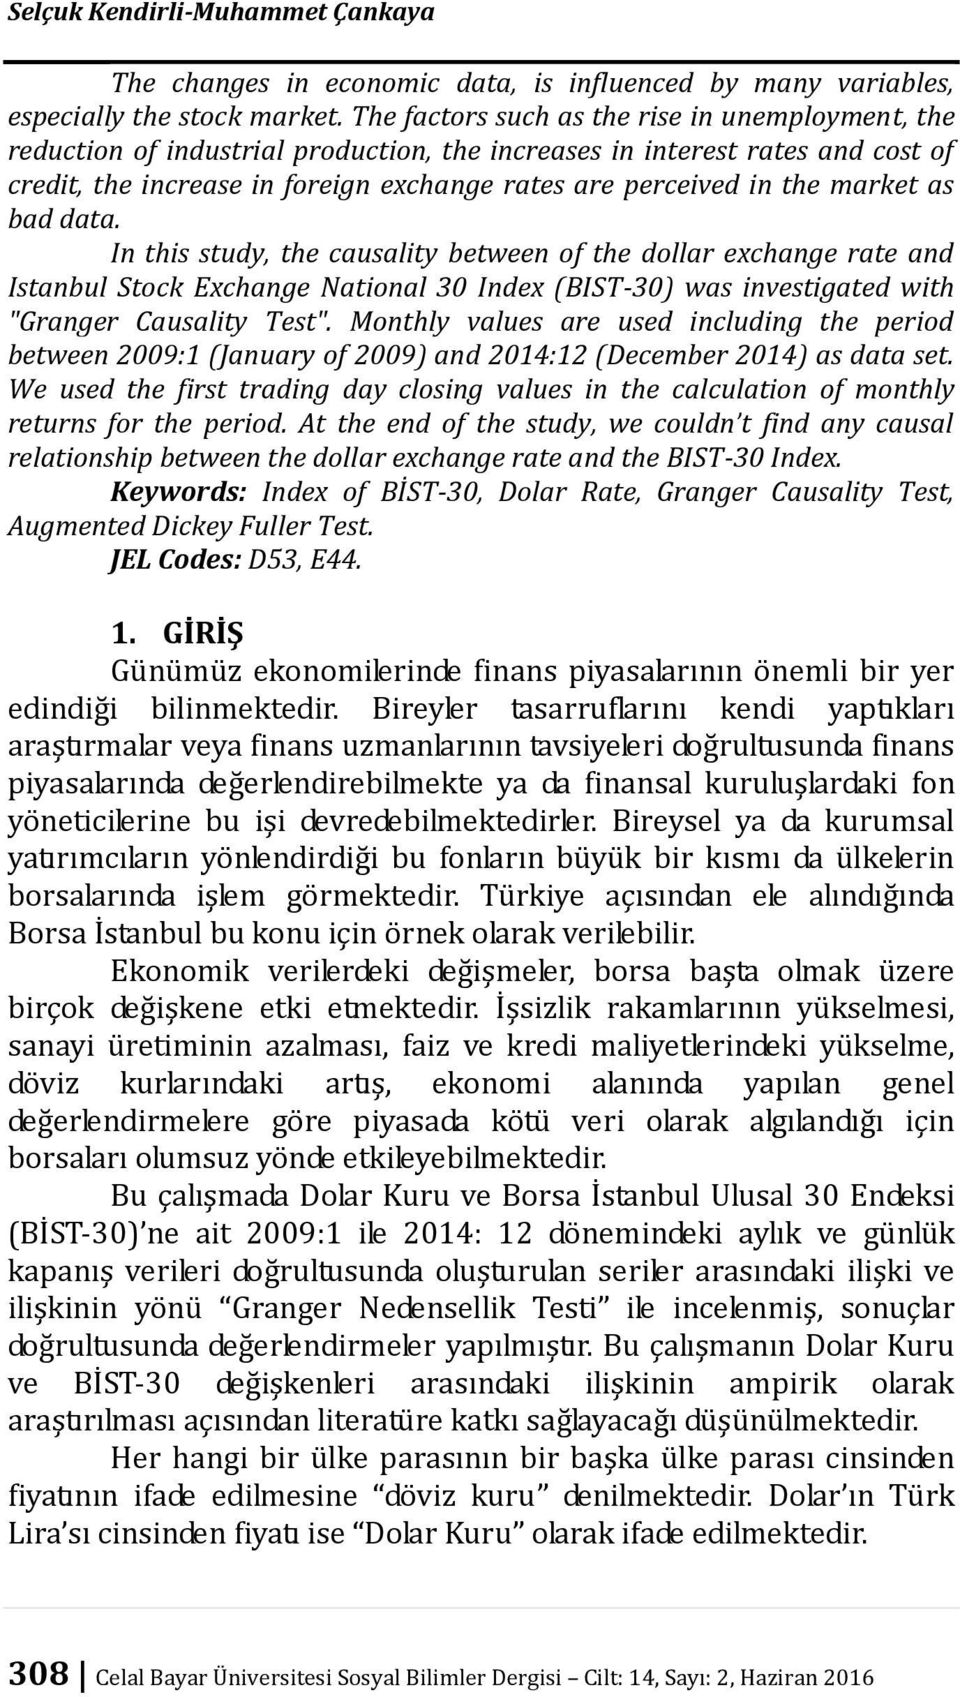 market as bad data. In this study, the causality between of the dollar exchange rate and Istanbul Stock Exchange National 30 Index (BIST-30) was investigated with "Granger Causality Test".